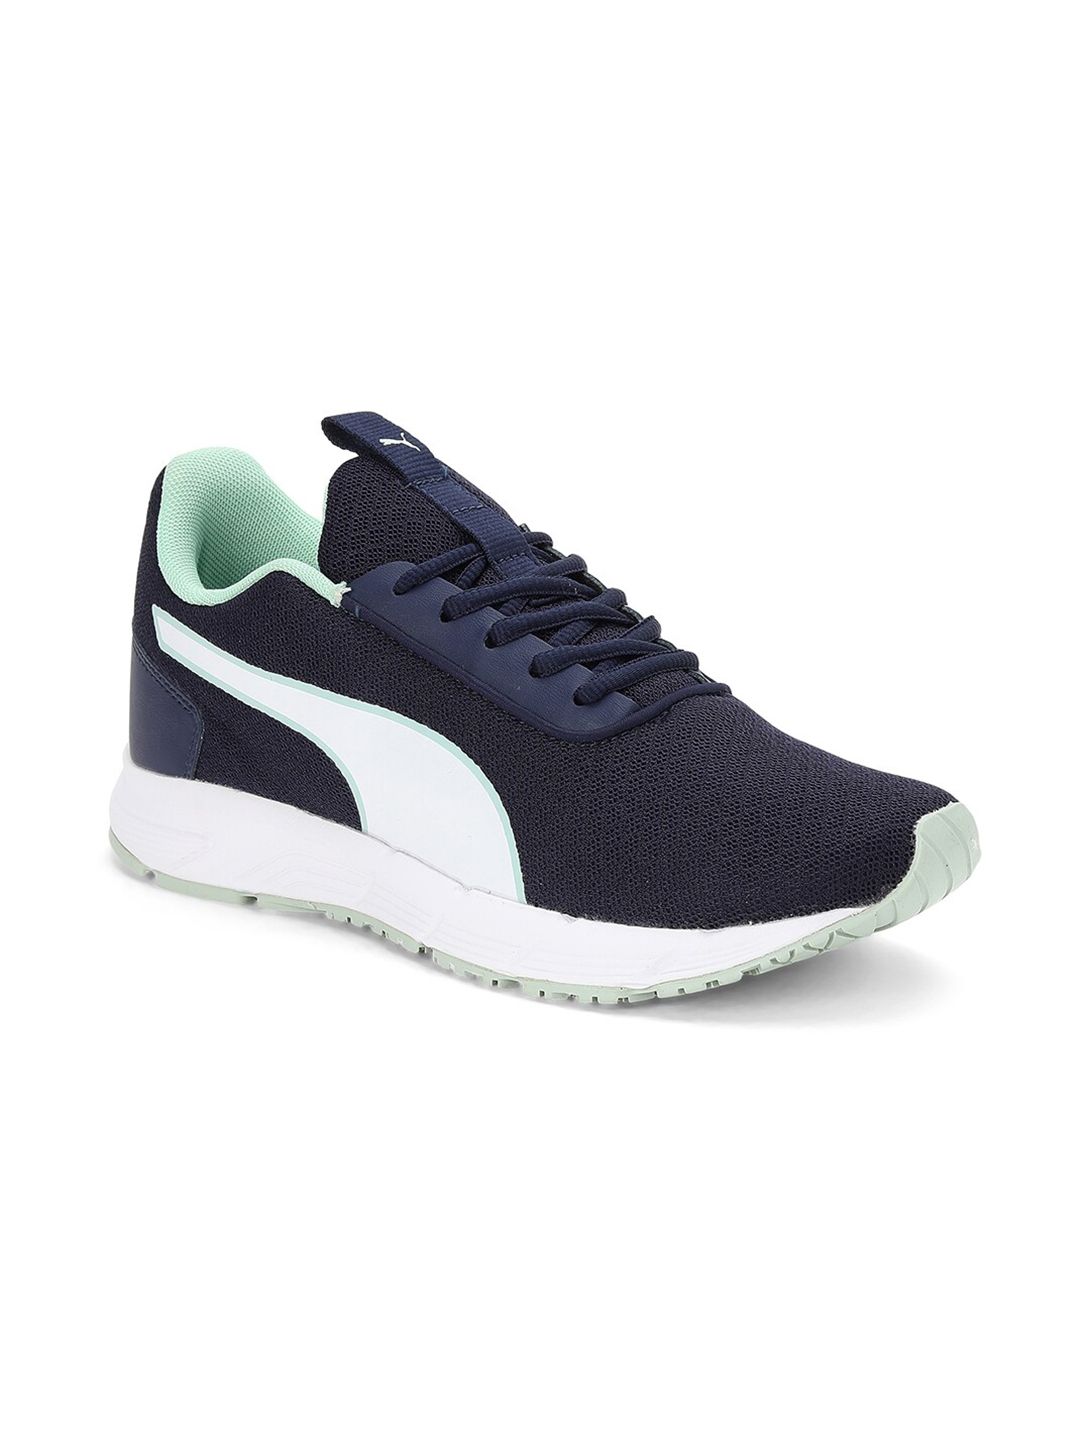 Puma Women Blue Textile Running Shoes Price in India